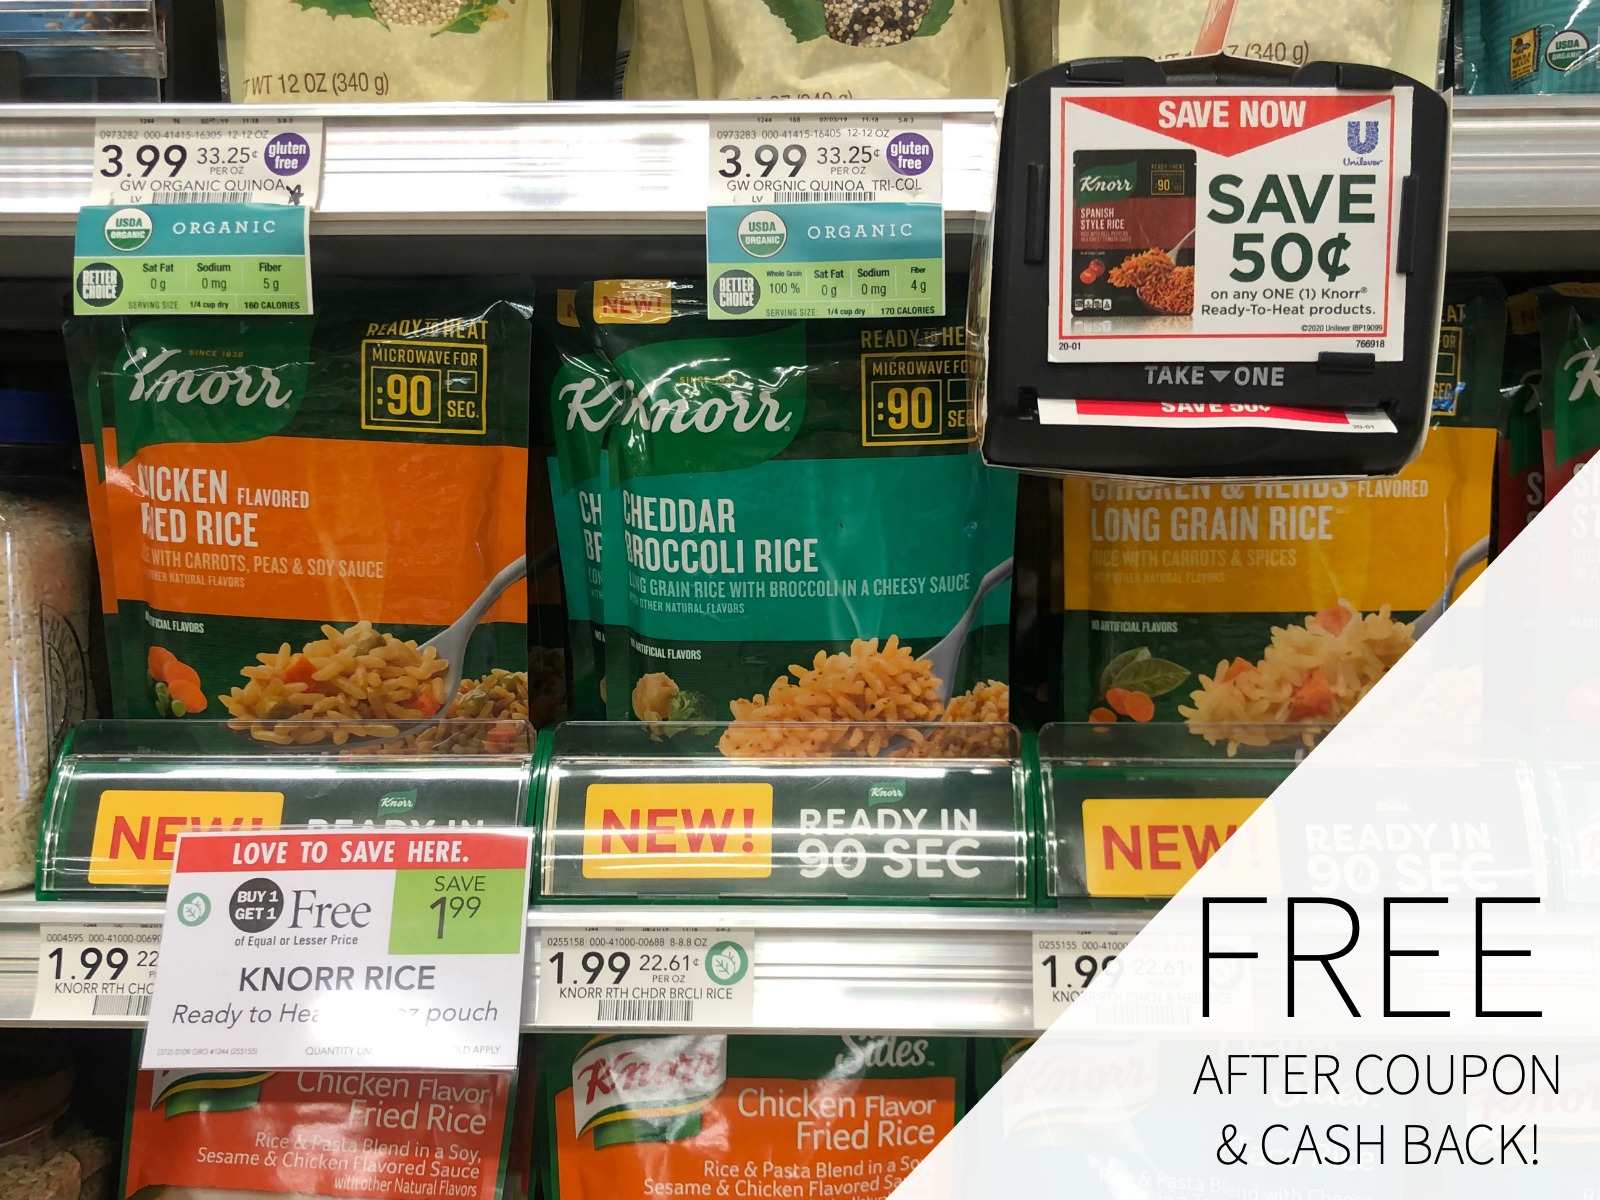 Stock Up On Knorr Sides, Selects and Ready to Heat – Buy One, Get One FREE At Publix